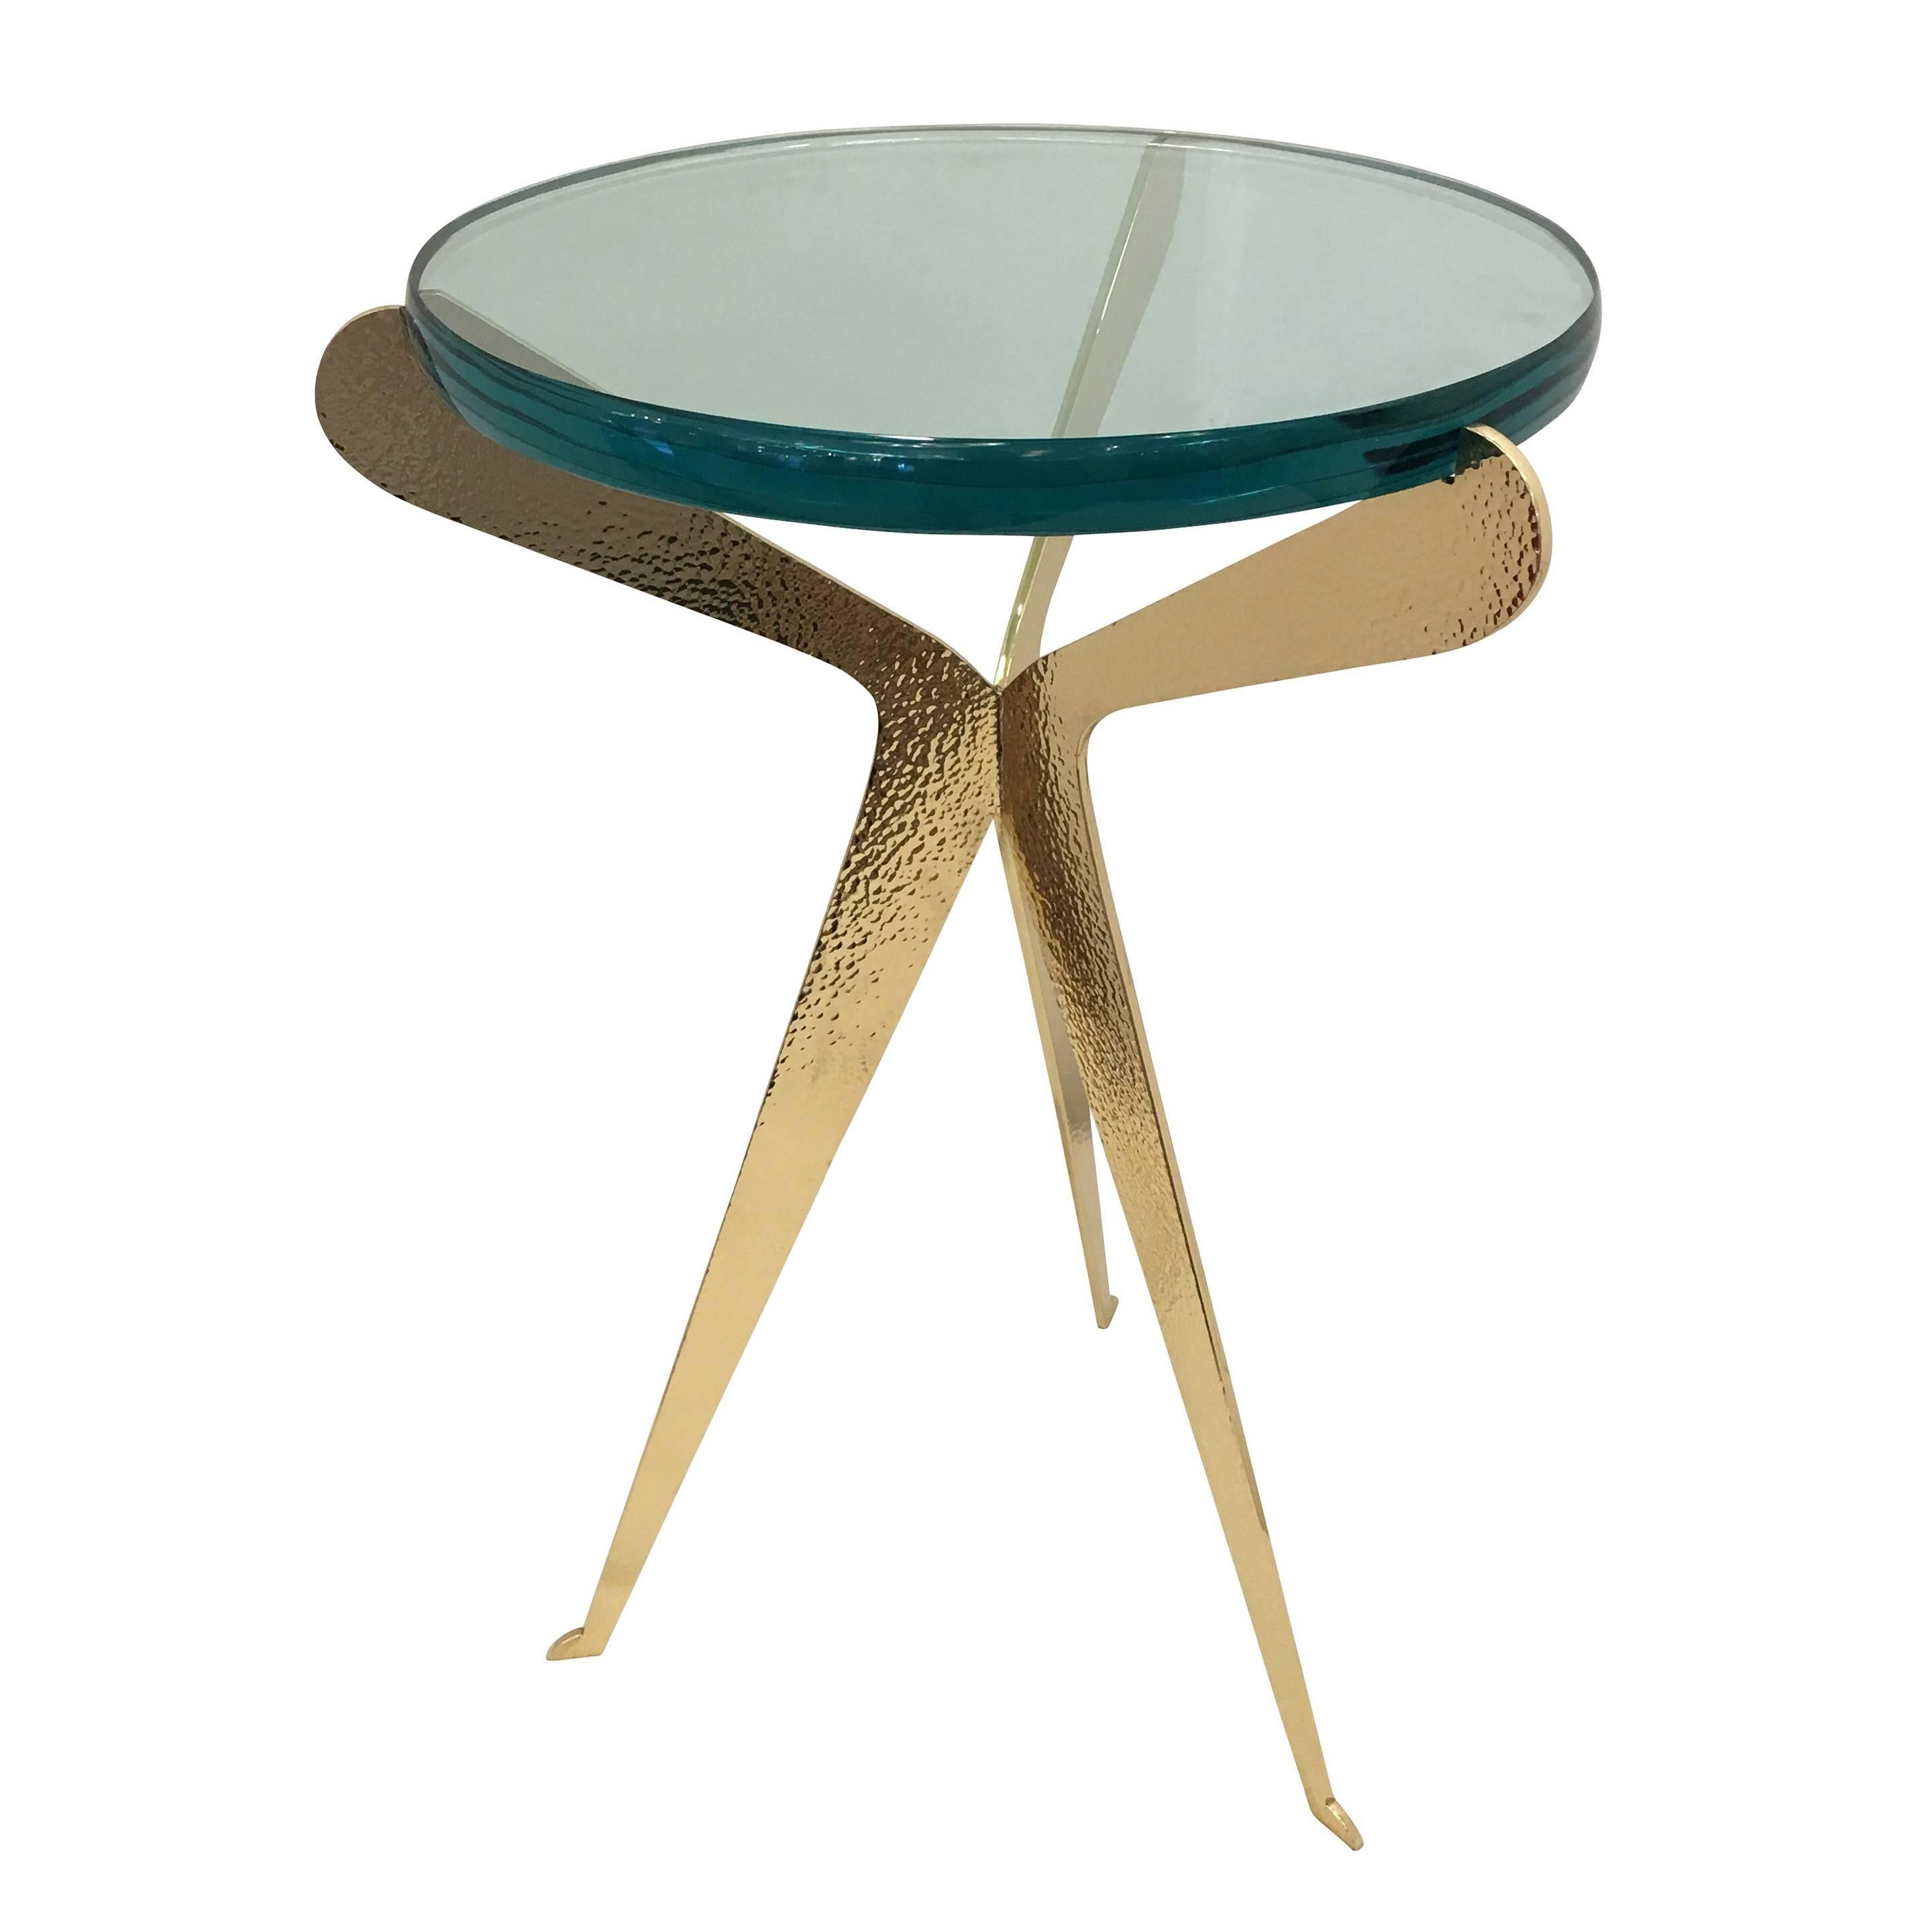 'Fiore" Side Table-Hammered Brass Version by Gaspare Asaro for FormA